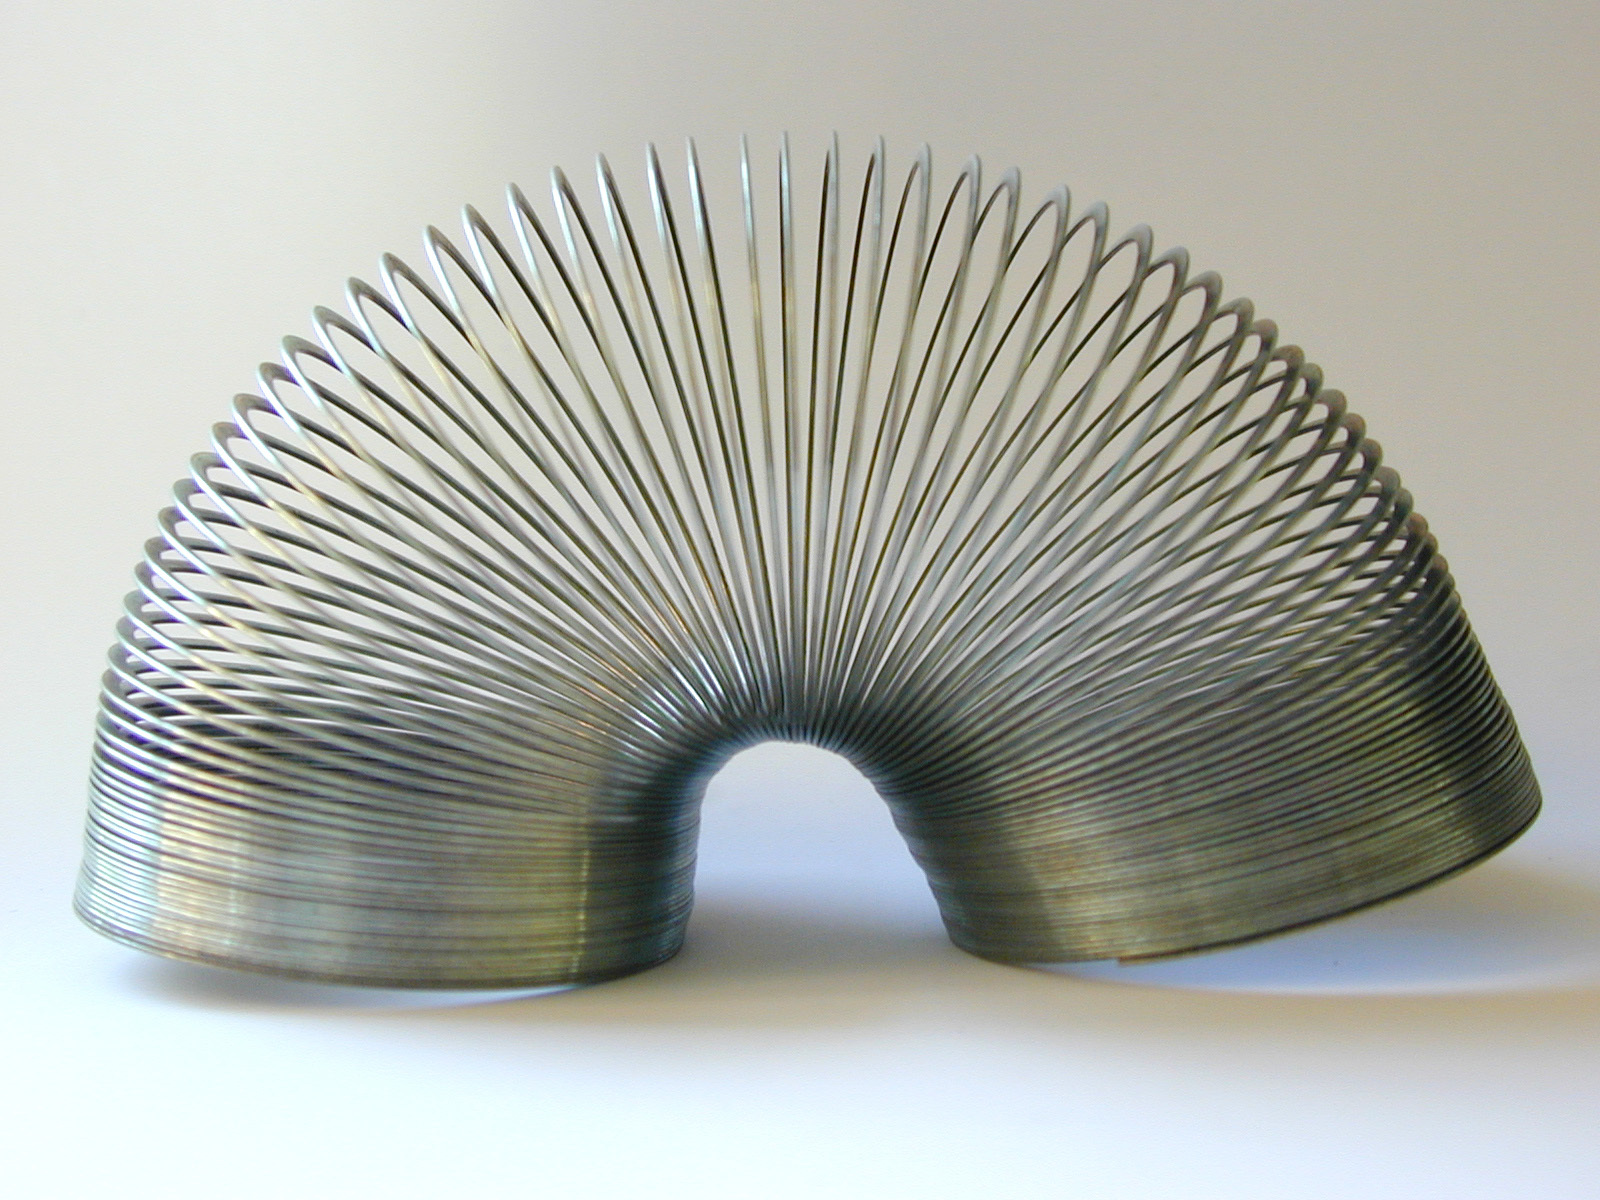 Slinky Pictures